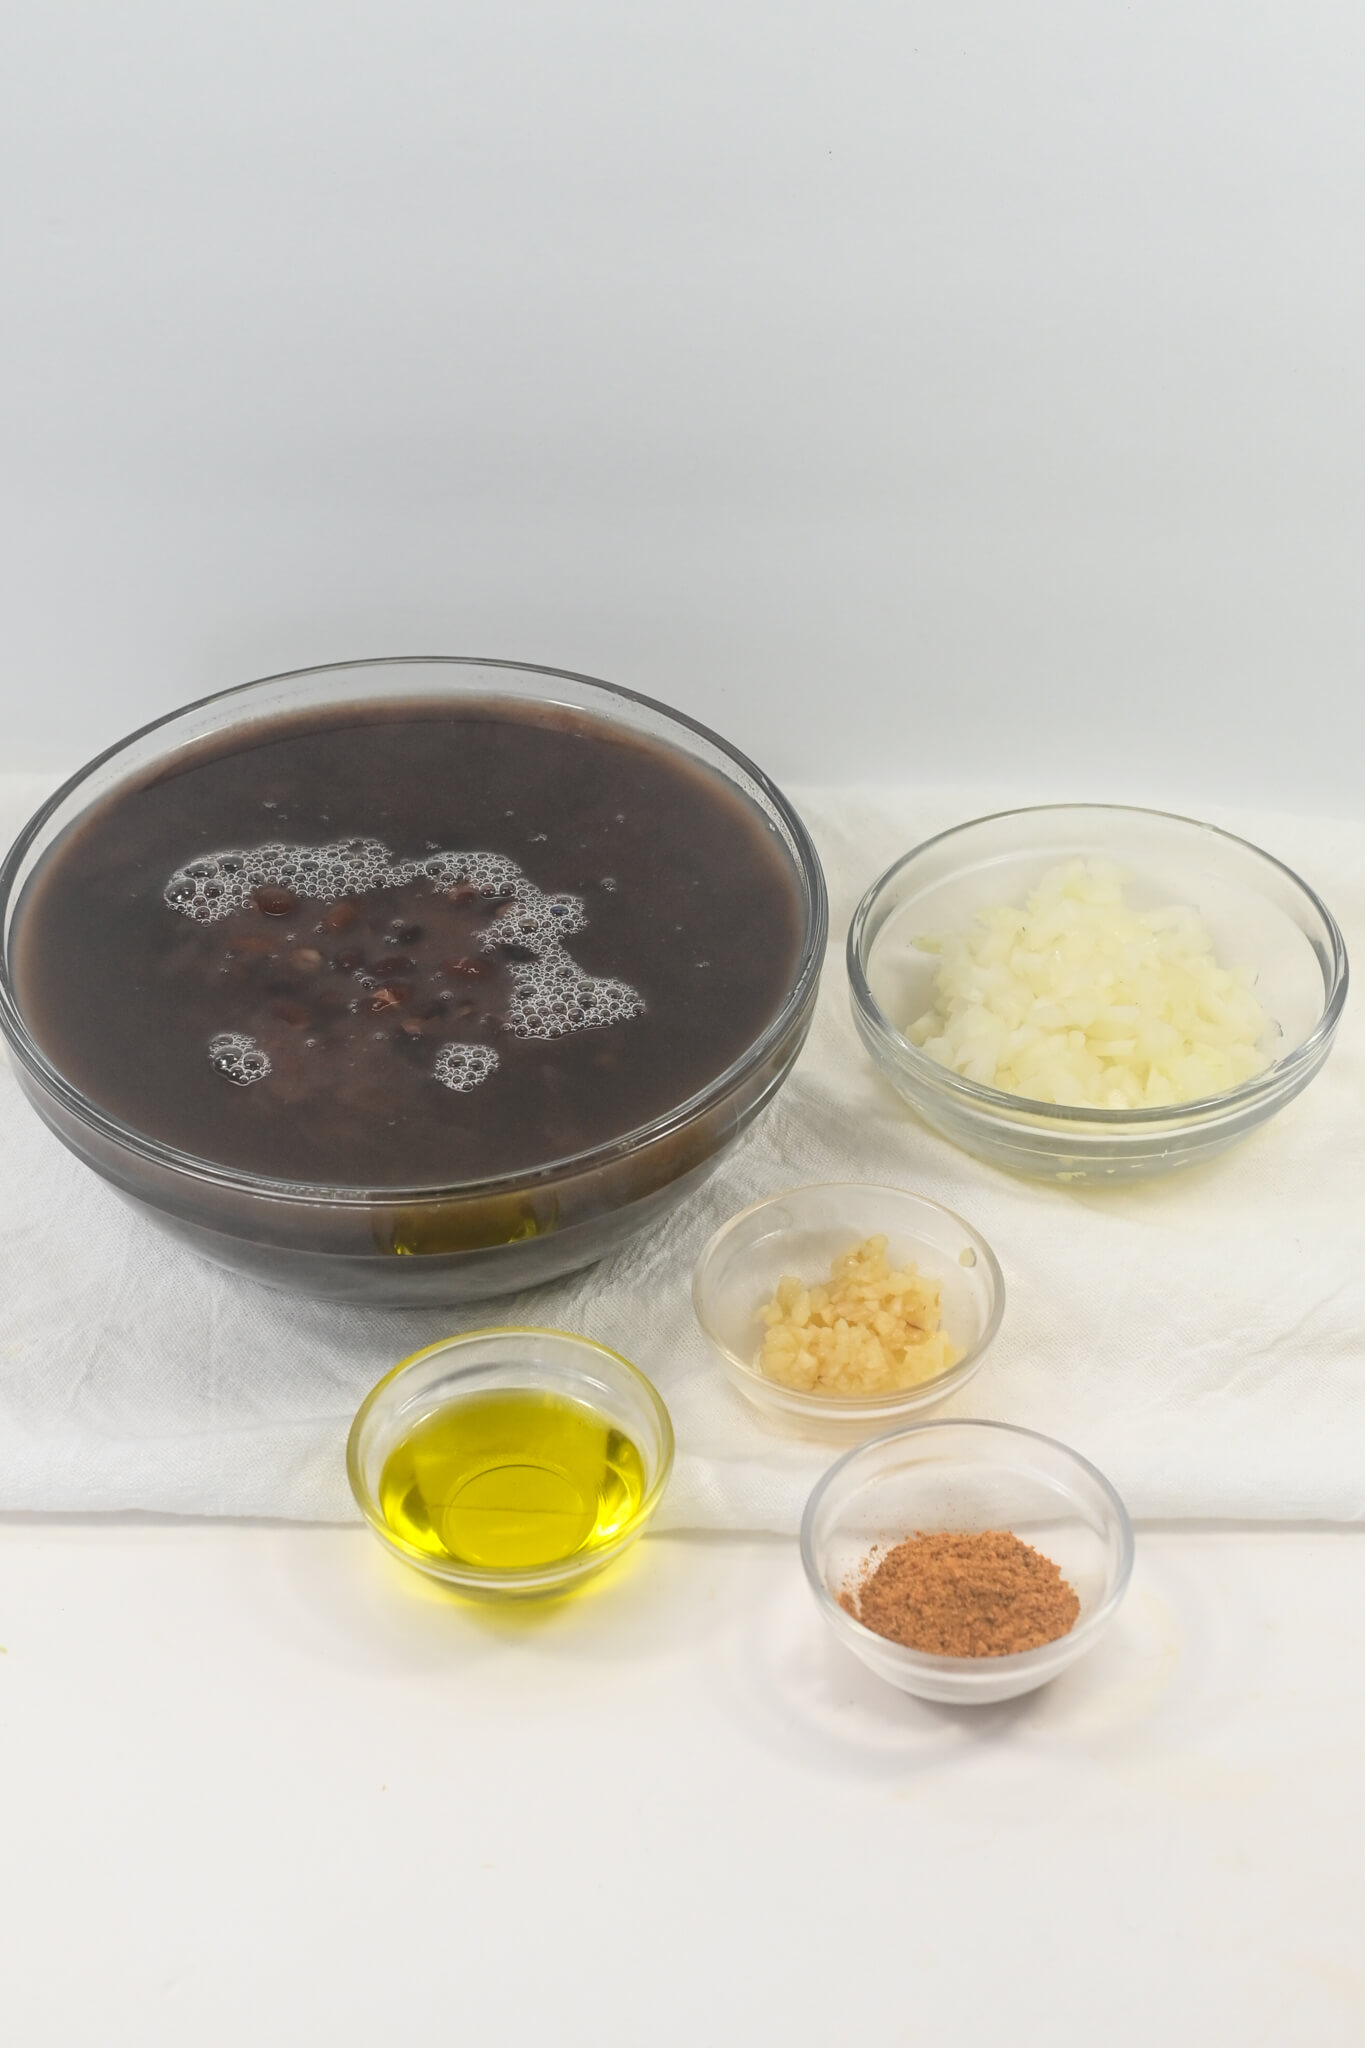 Bowl of Mexican black bean soup with small bowls of chopped onions, minced garlic, olive oil, and ground pepper arranged on a white surface.